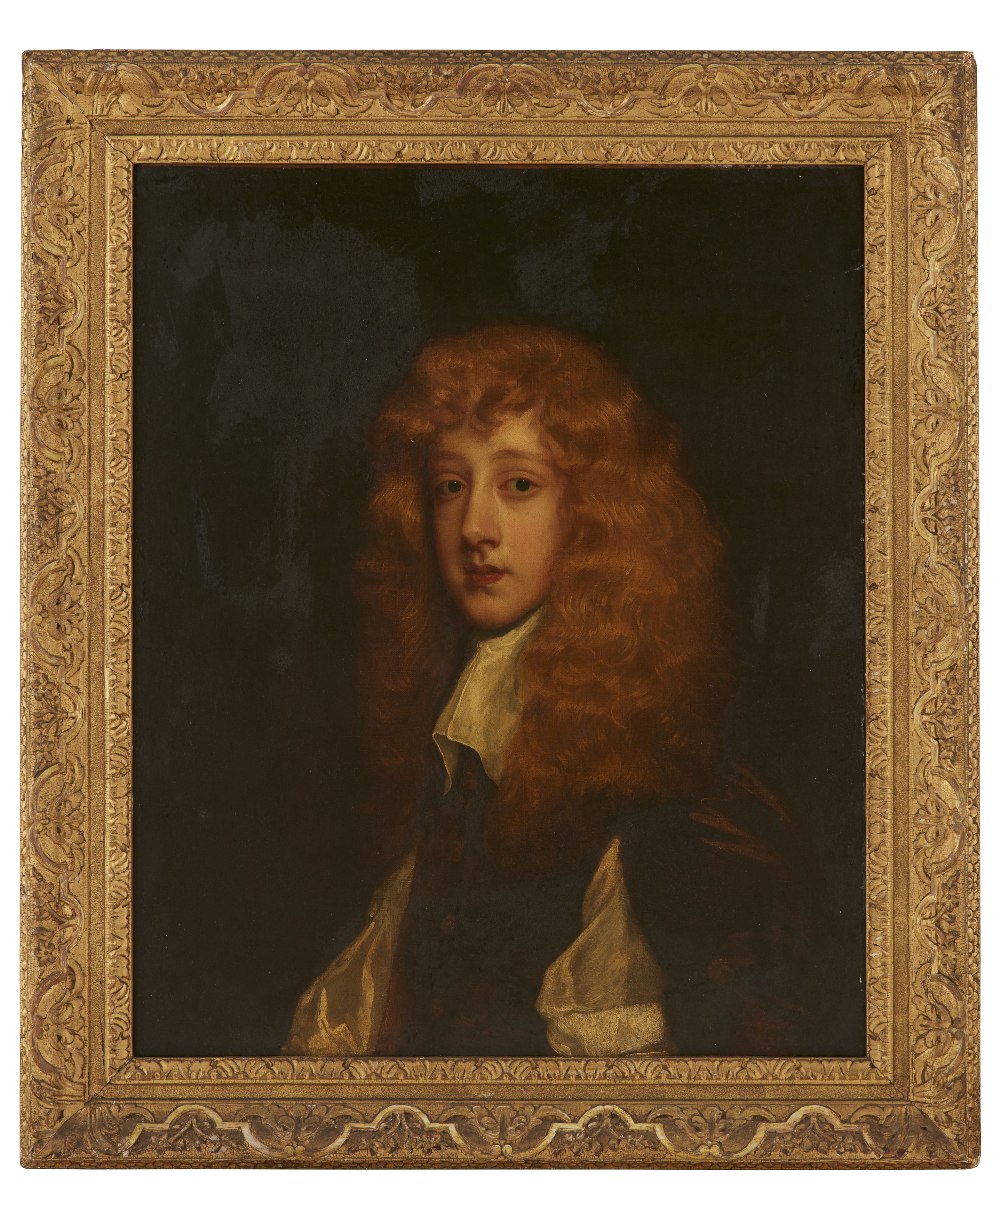 MANNER OF SIR PETER LELYHALF LENGTH PORTRAIT OF BOY WITH LACE CRAVATOil on canvas74cm x 61cm (29in x